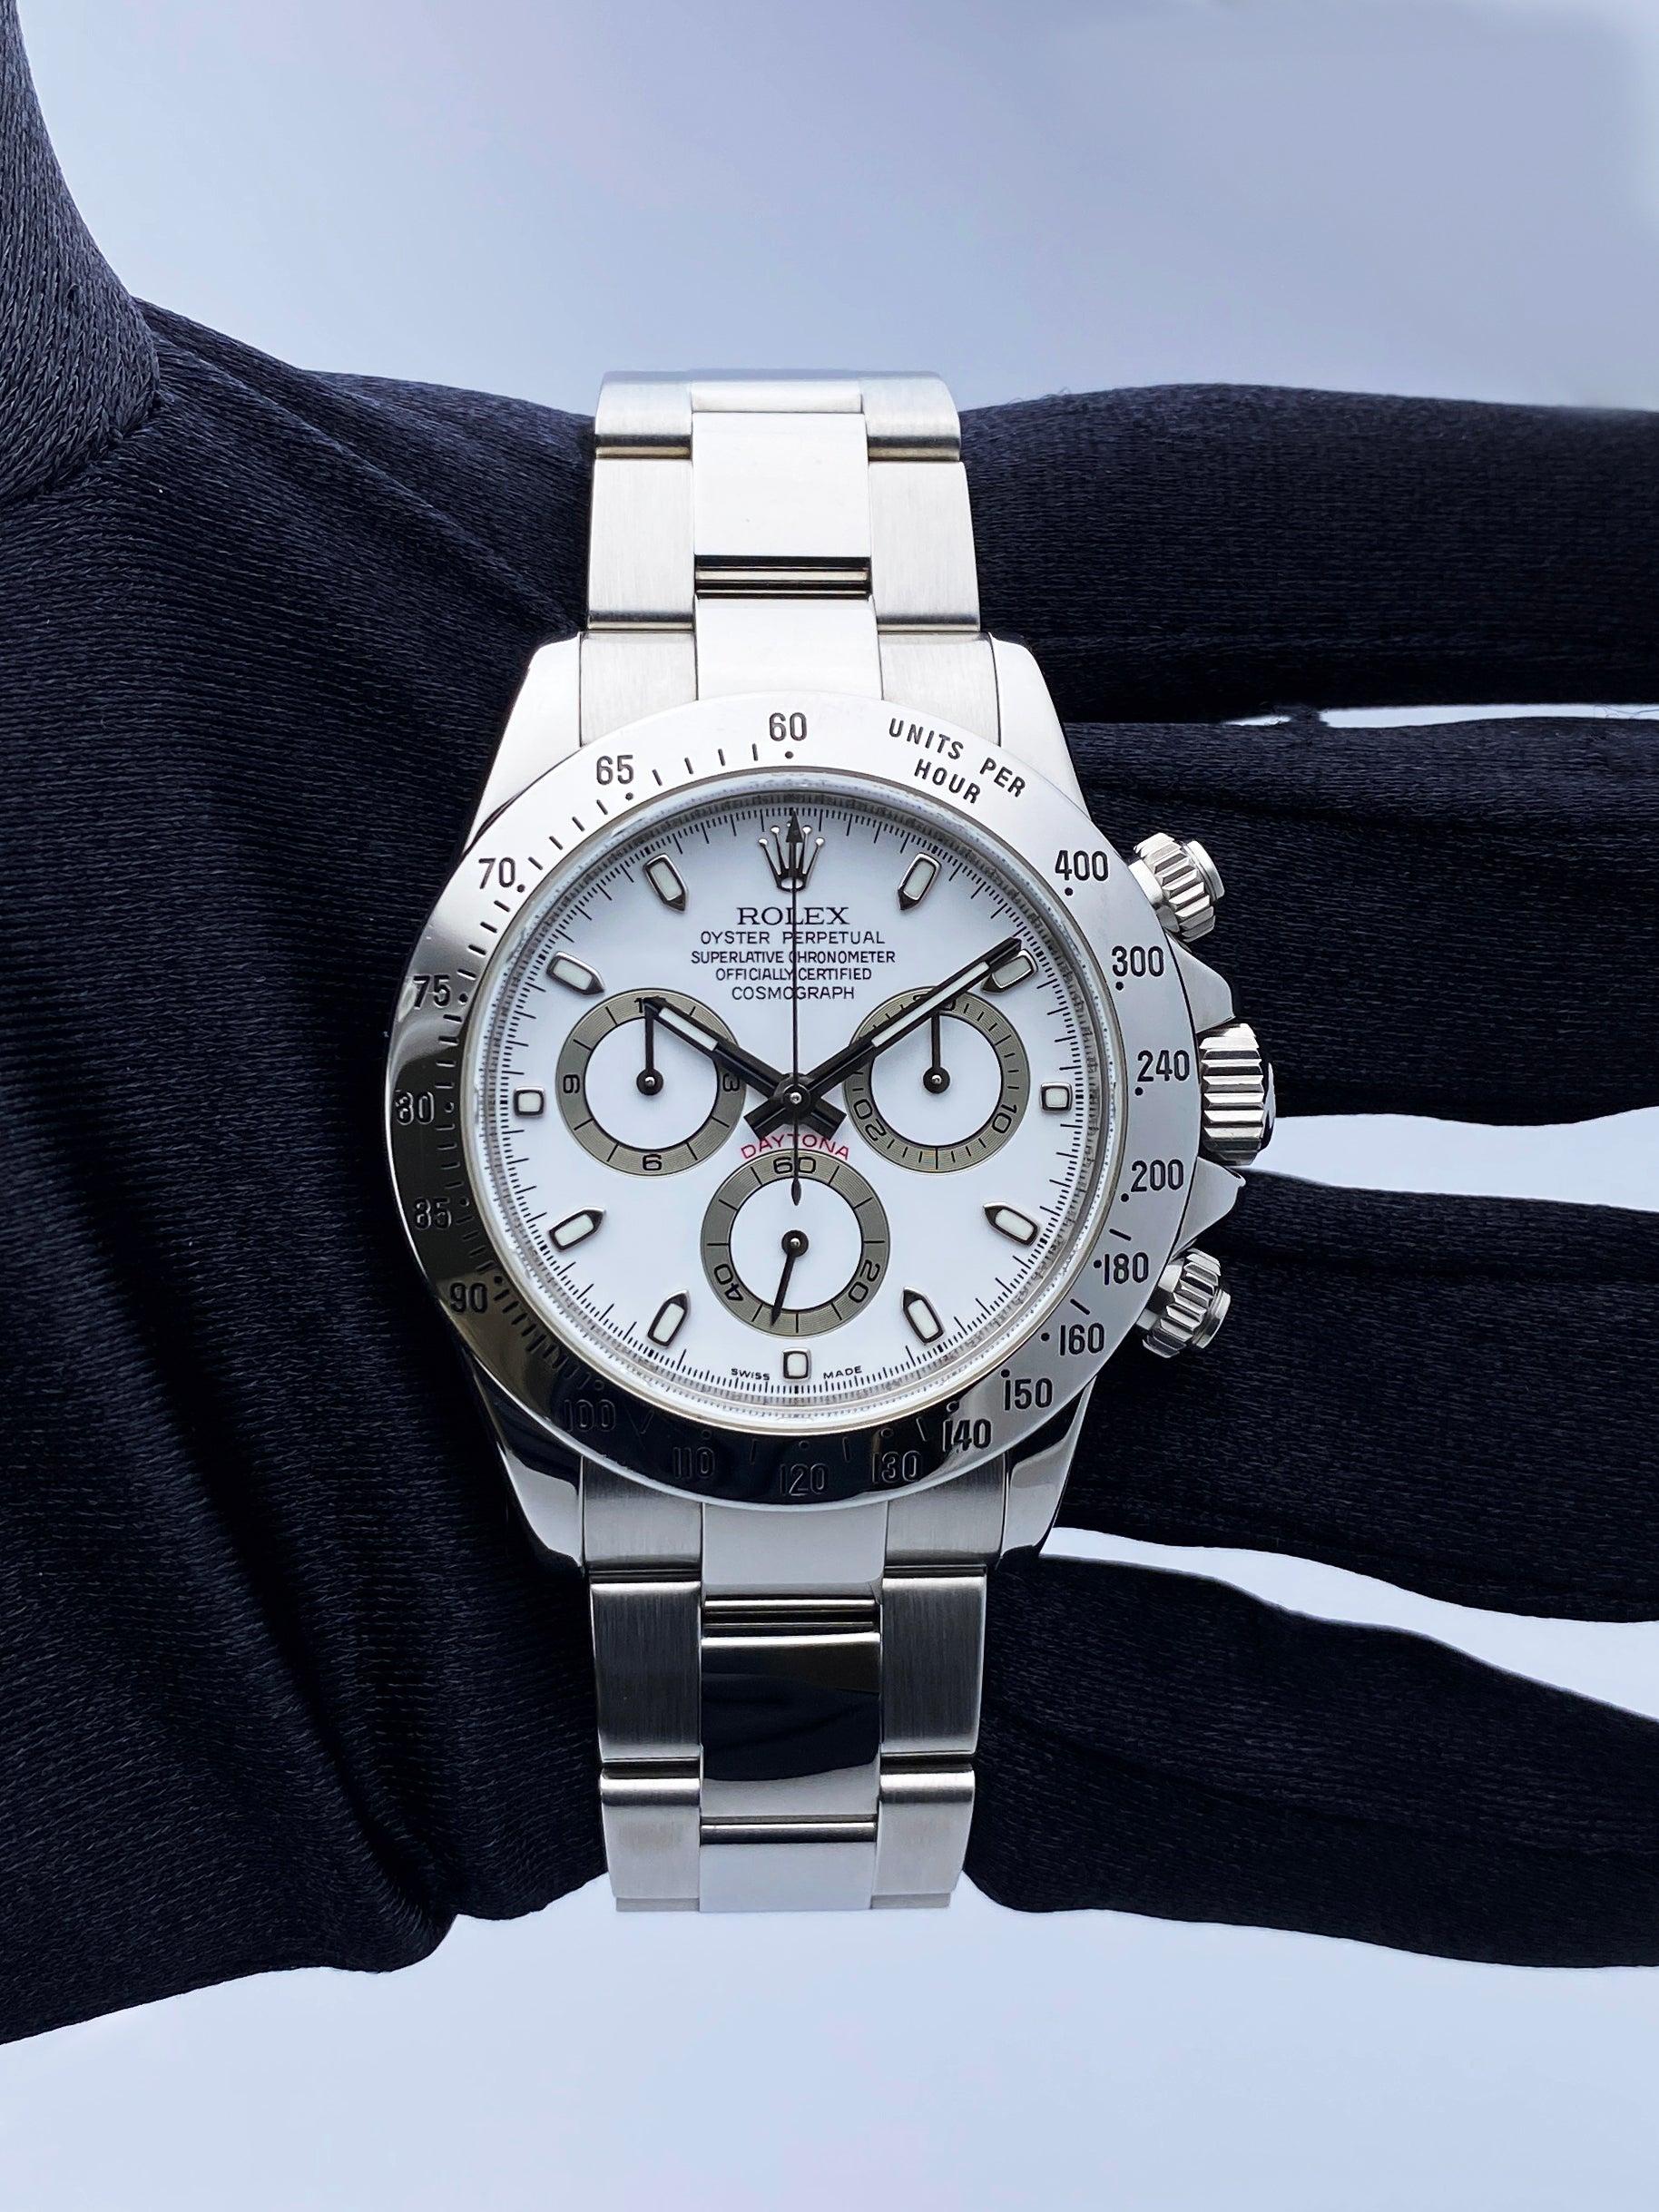 Rolex Oyster Perpetual Daytona 116520 Mens Watch. 40mm stainless steel case with stainless steel tachymeter bezel. White dial with luminous sliver hands and index hour marker. Three sub-dials. Small seconds hand at 6 o'clock. 30-minute counter at 3